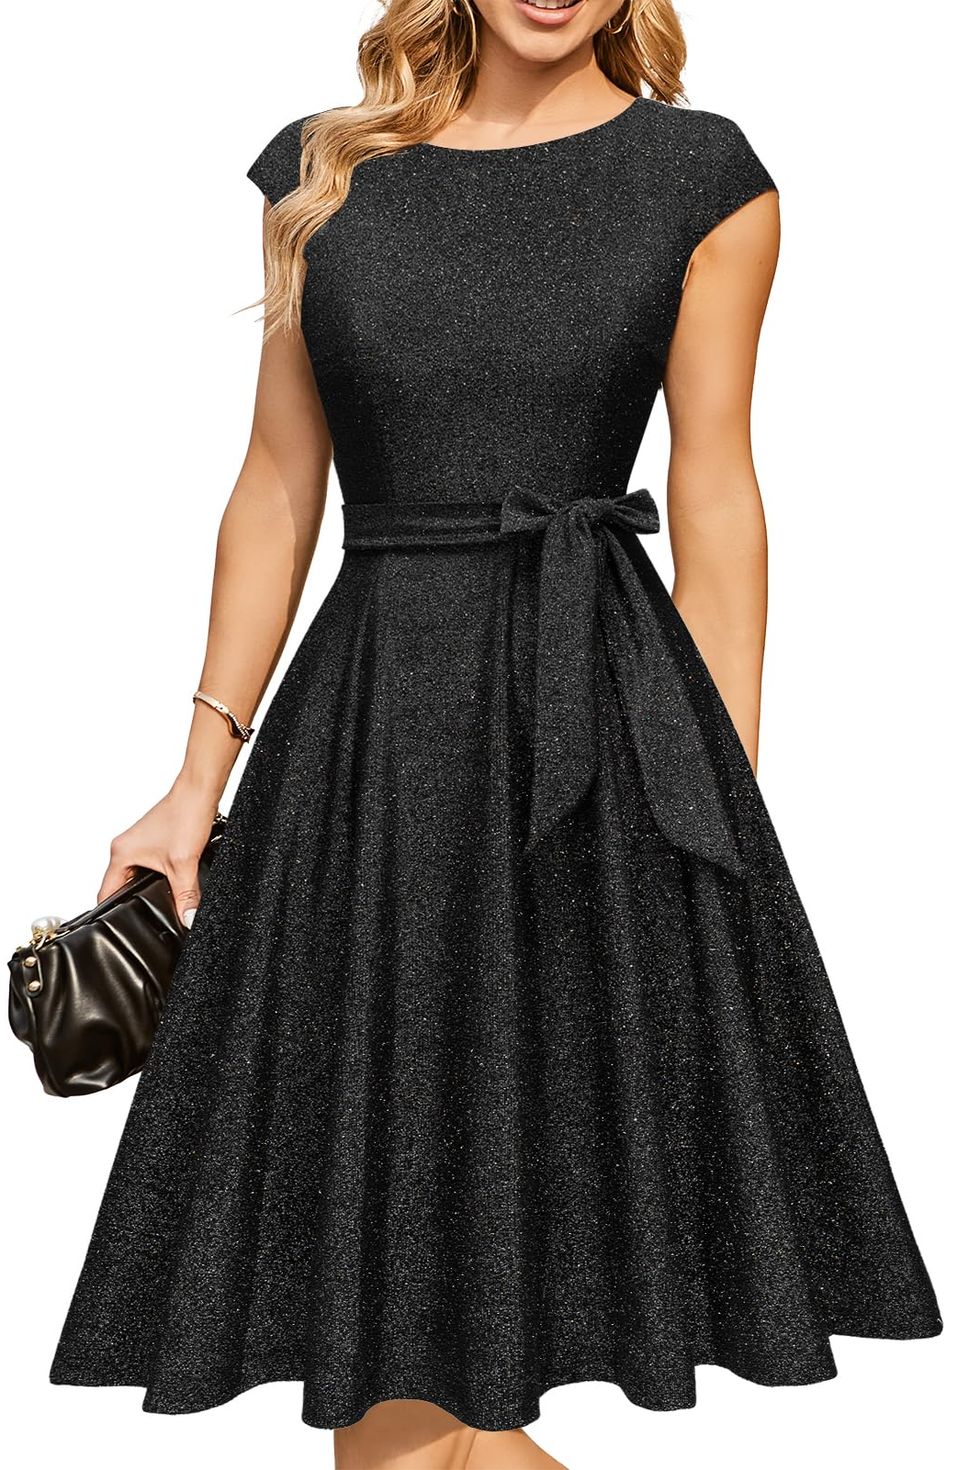 Amazon's Most Gorgeous Holiday Dresses Are All Under $60